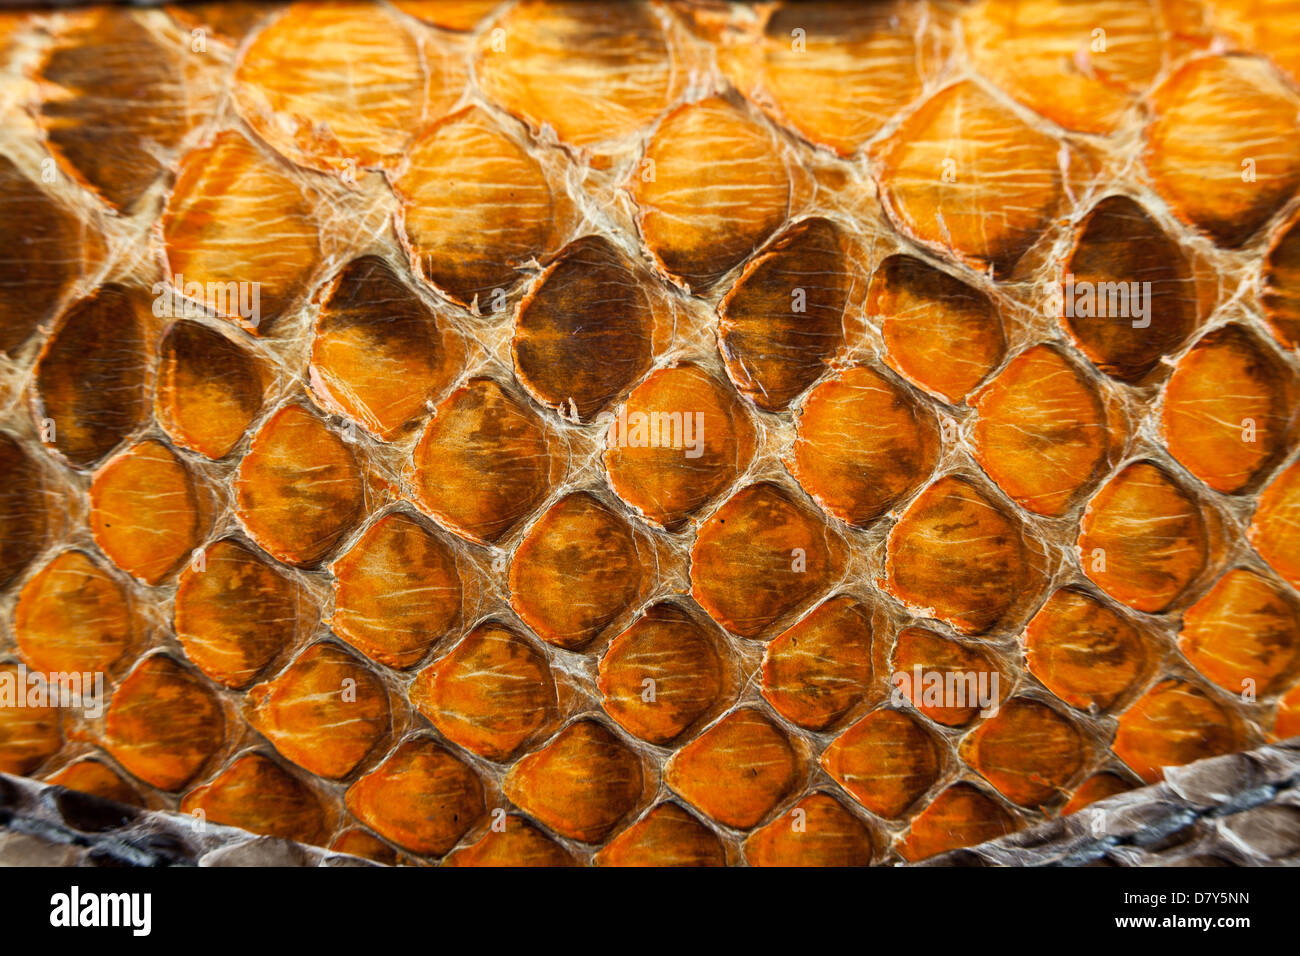 Background, texture of a skin of a snake close up Stock Photo